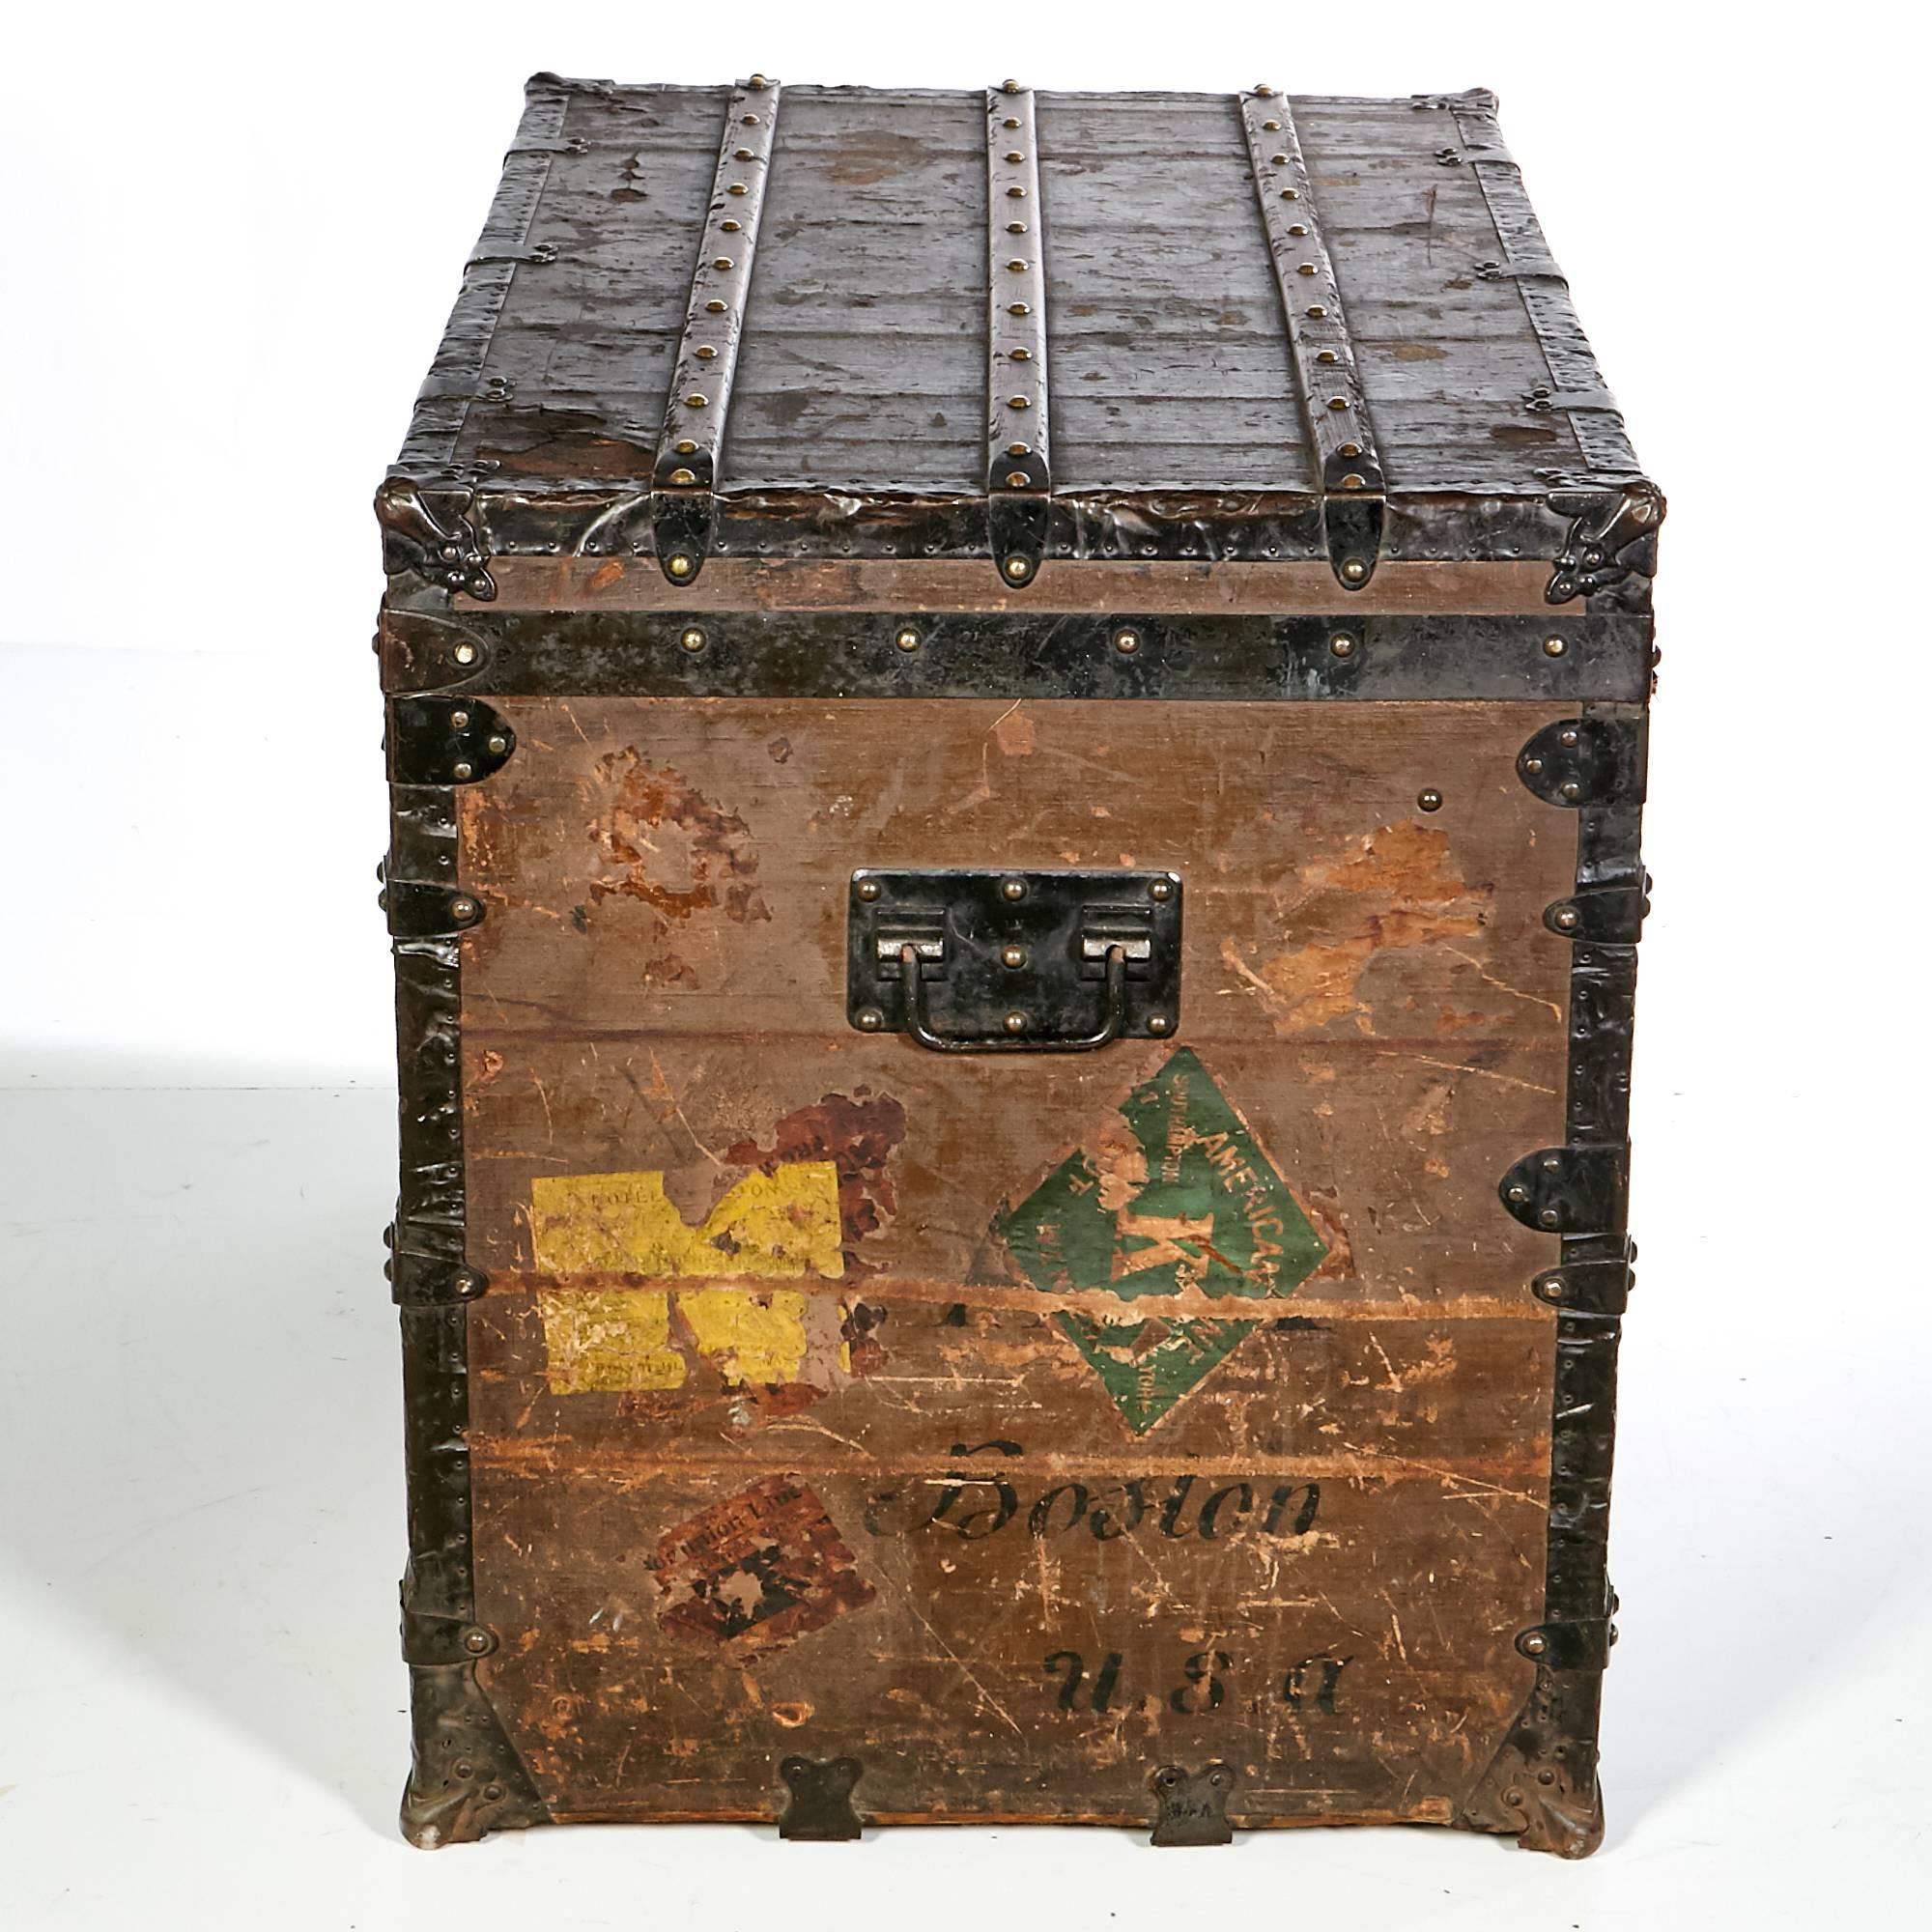 Late 1800s large Louis Vuitton steamer trunk with monogrammed LV hardware and paper label inside. Features the five digit Serial number with the London 454 Strand marked on paper label. Trunk is made of wood and metal hardware accents. Multiple